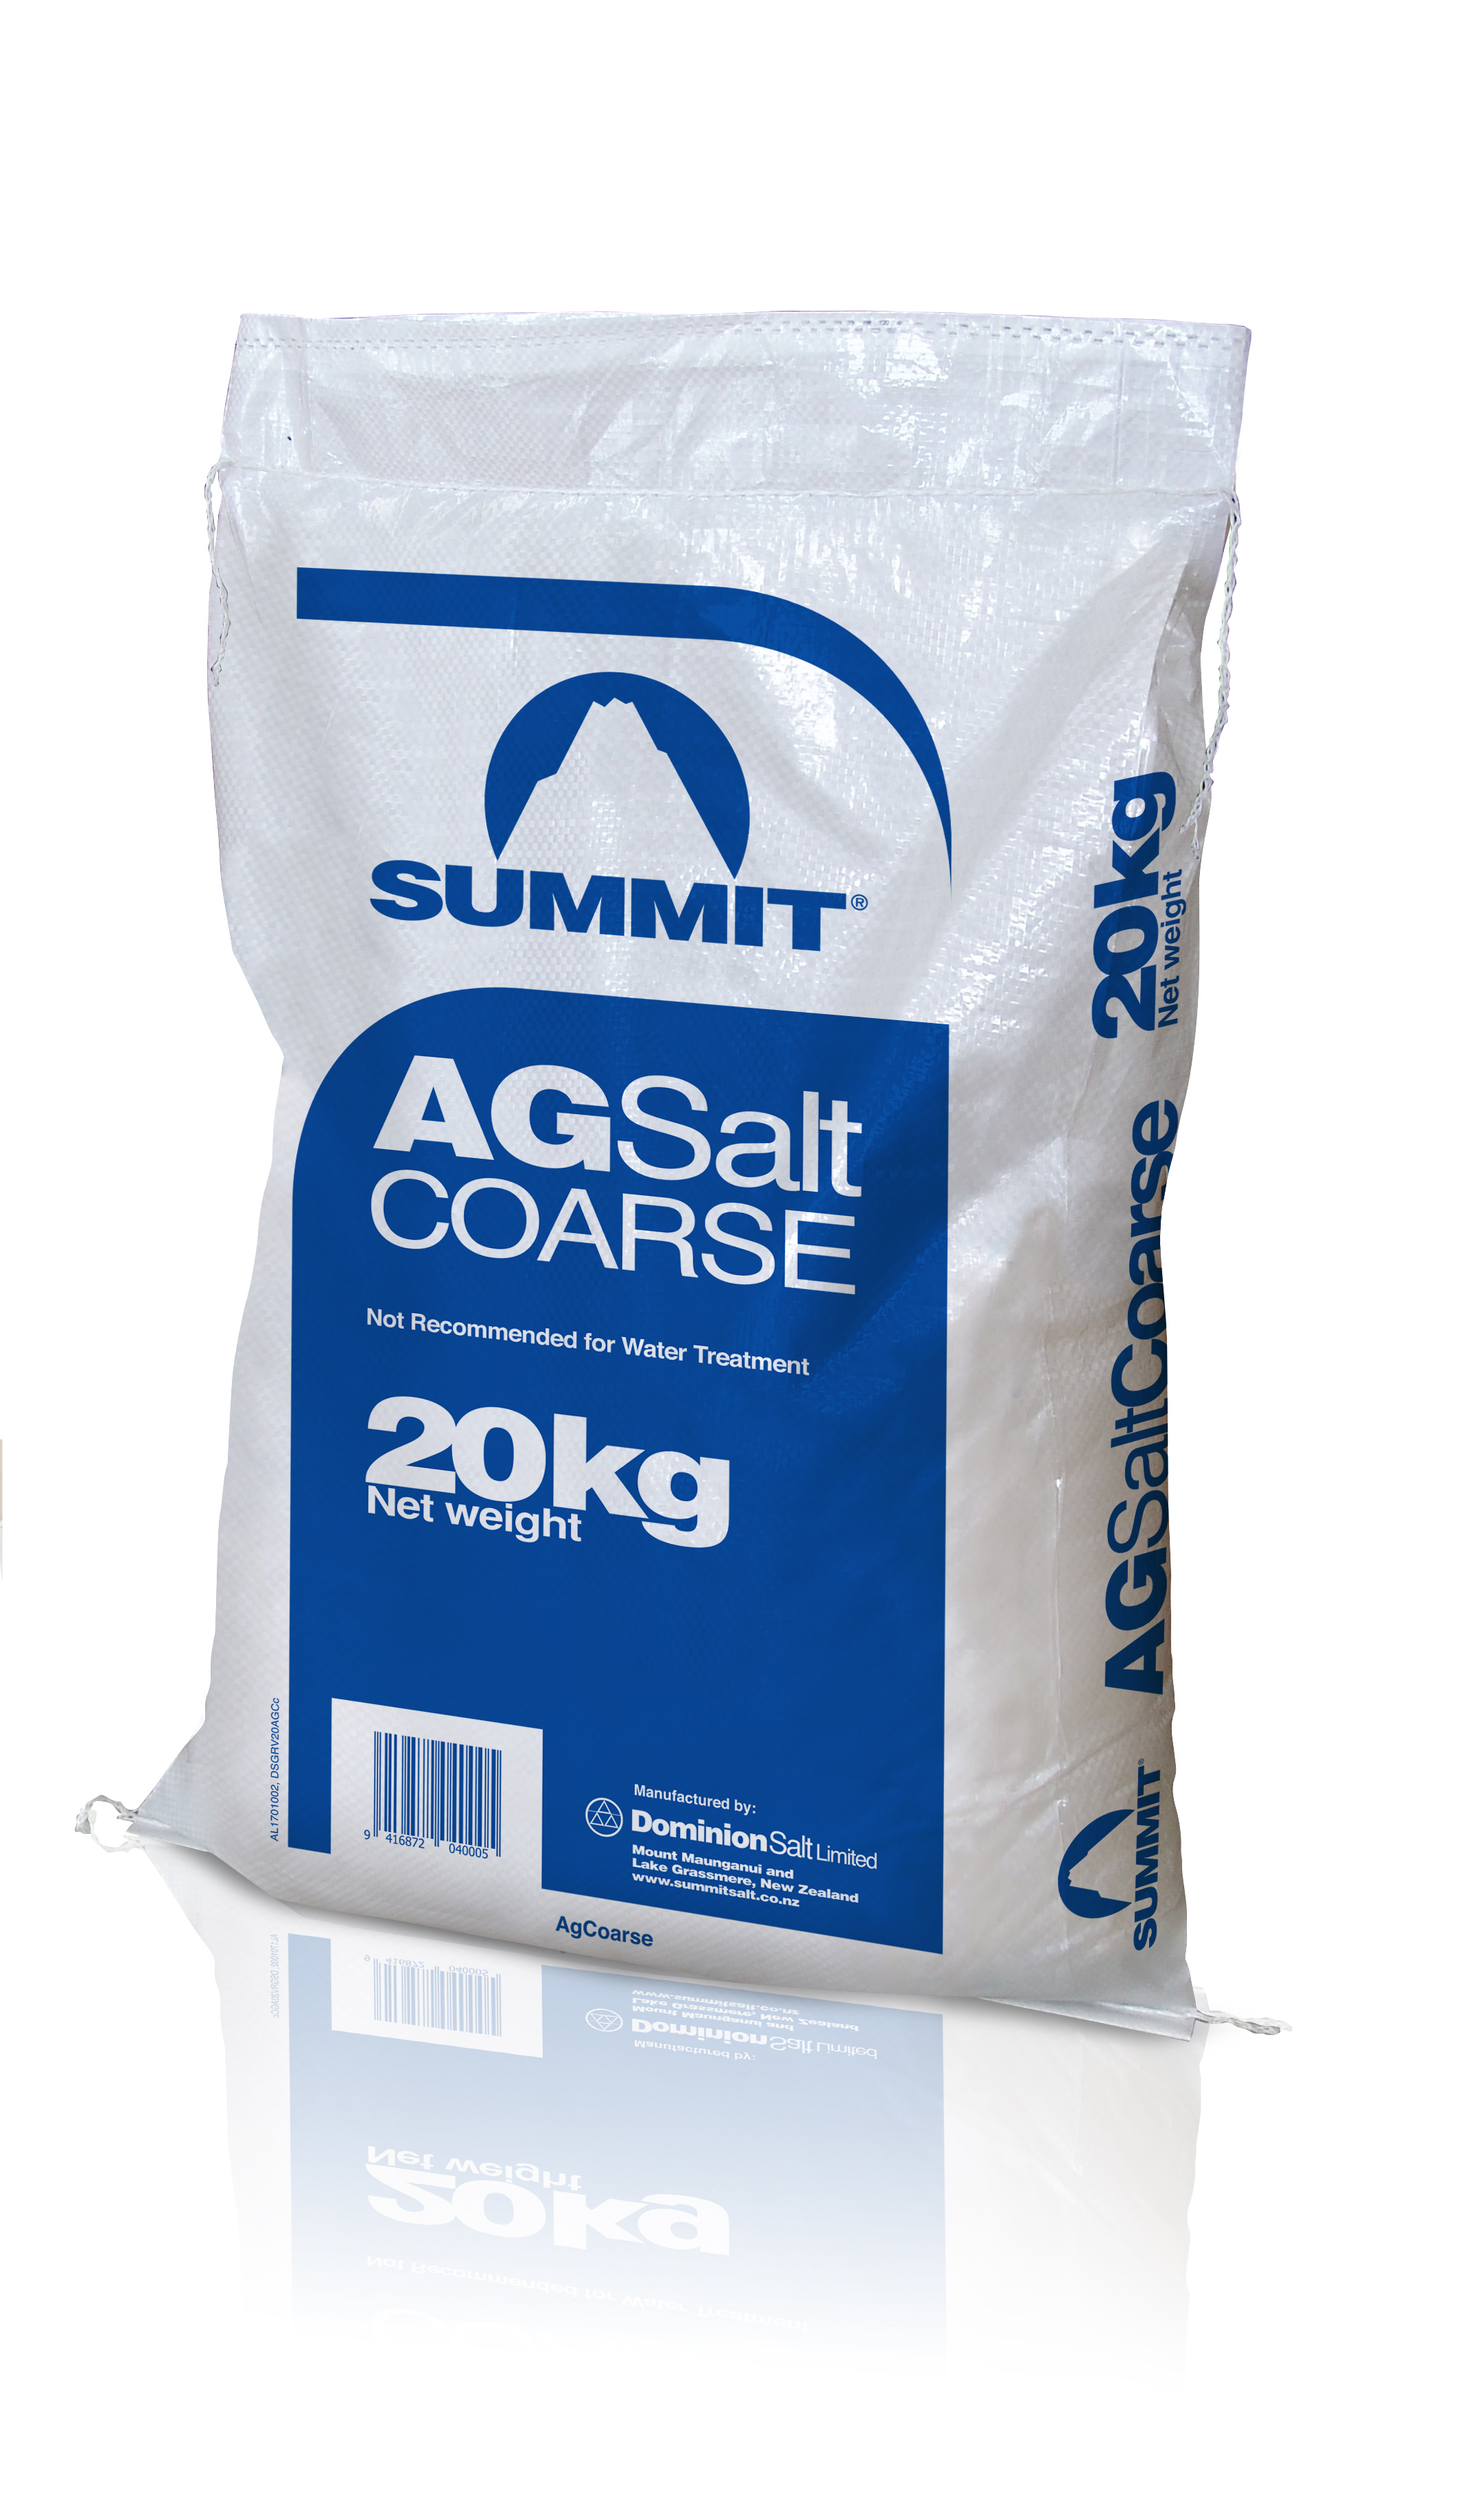 You are currently viewing Summit agsalt coarse